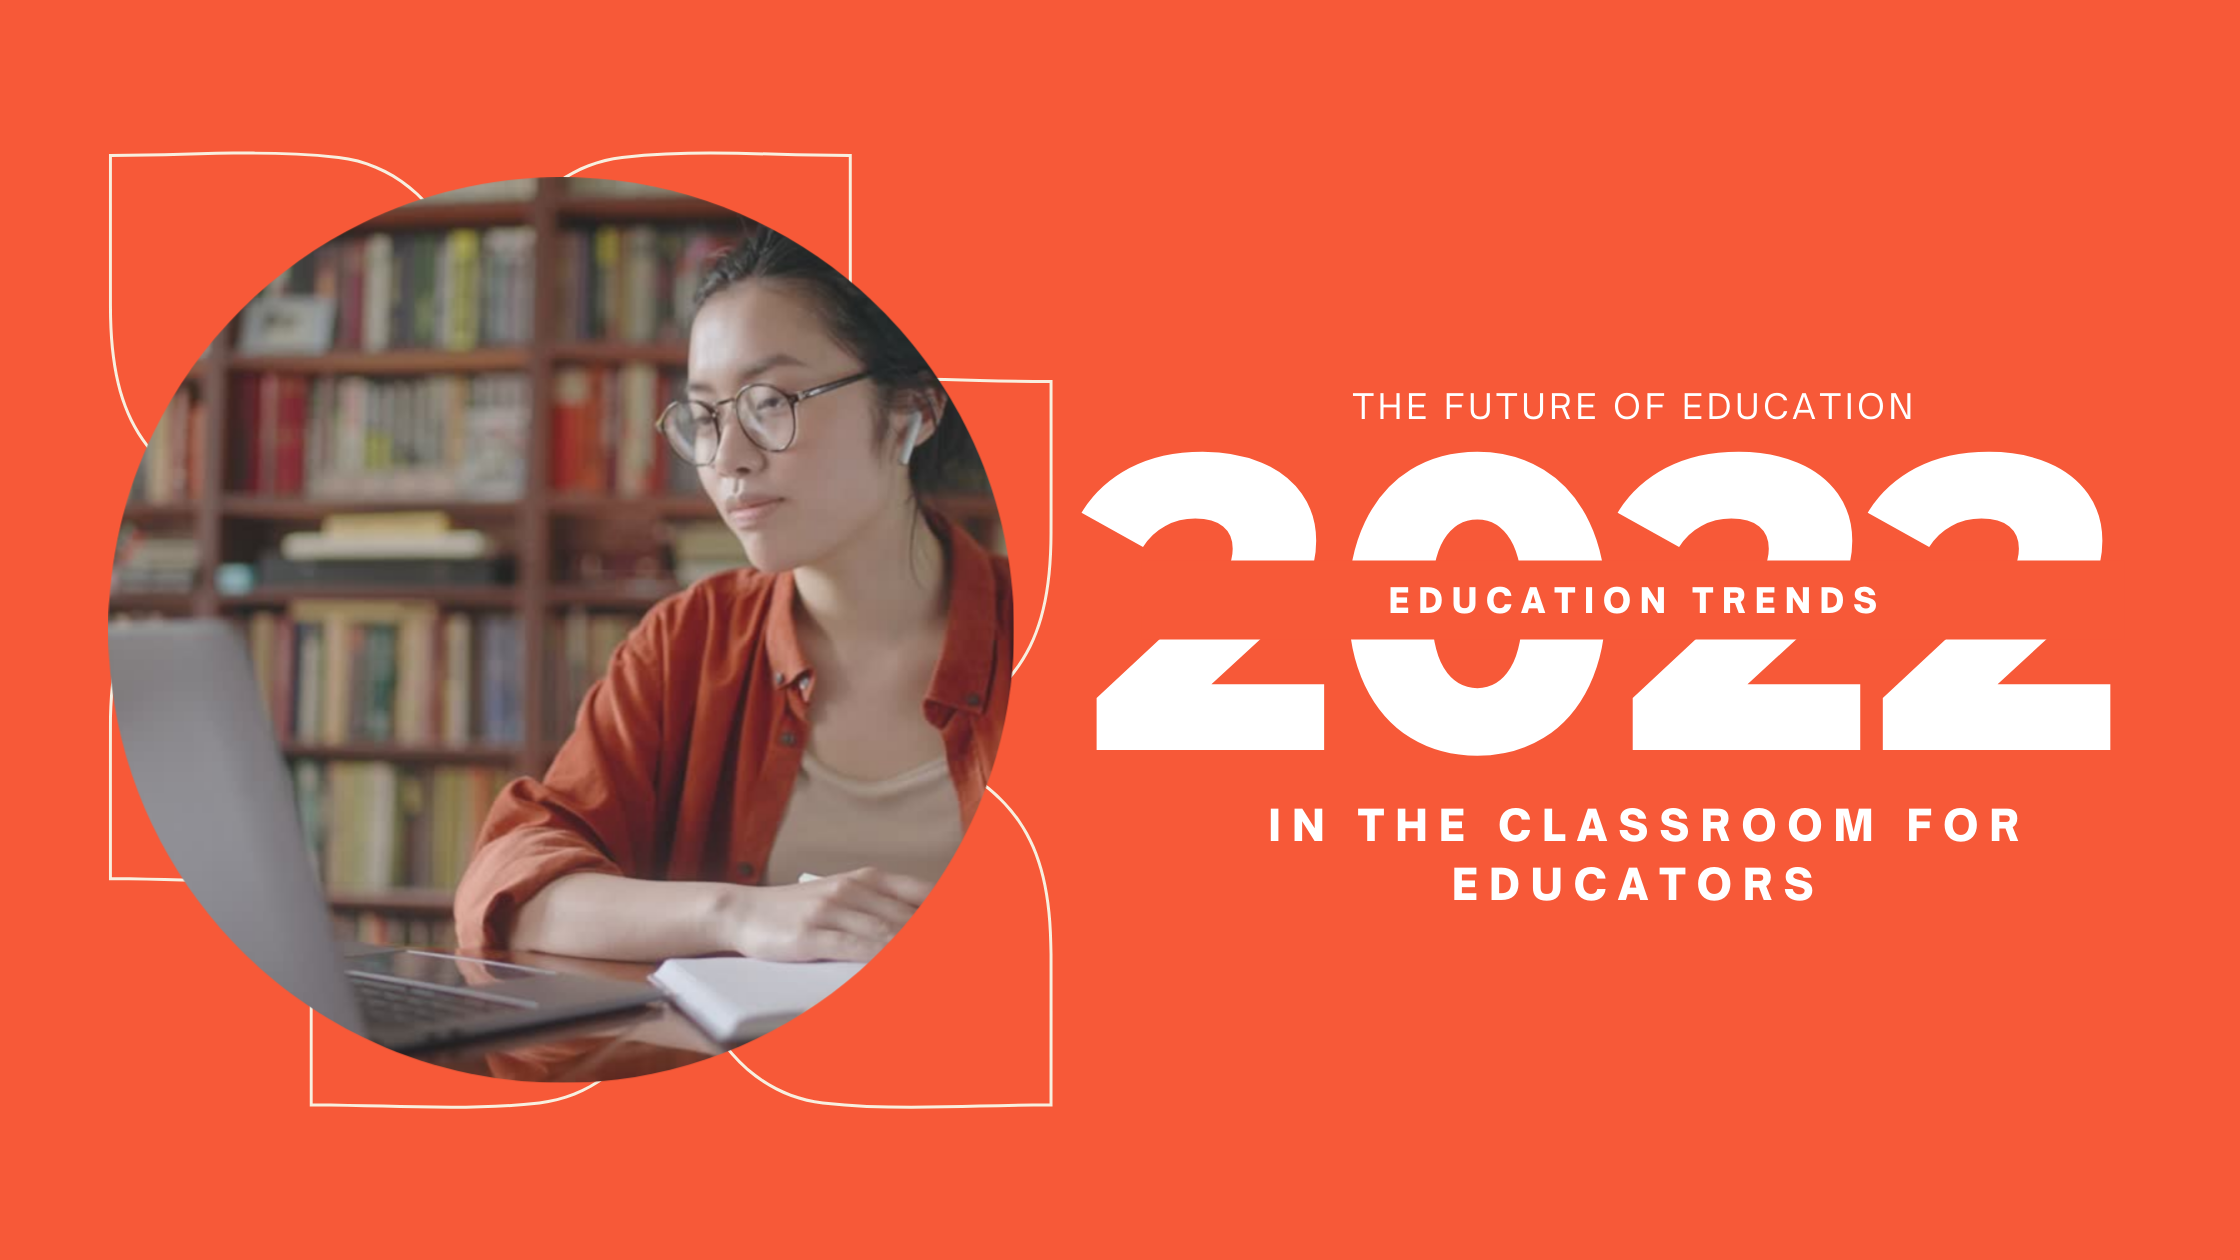 The Future of Education: 2022 Education Trends (In the Classroom) for Educators